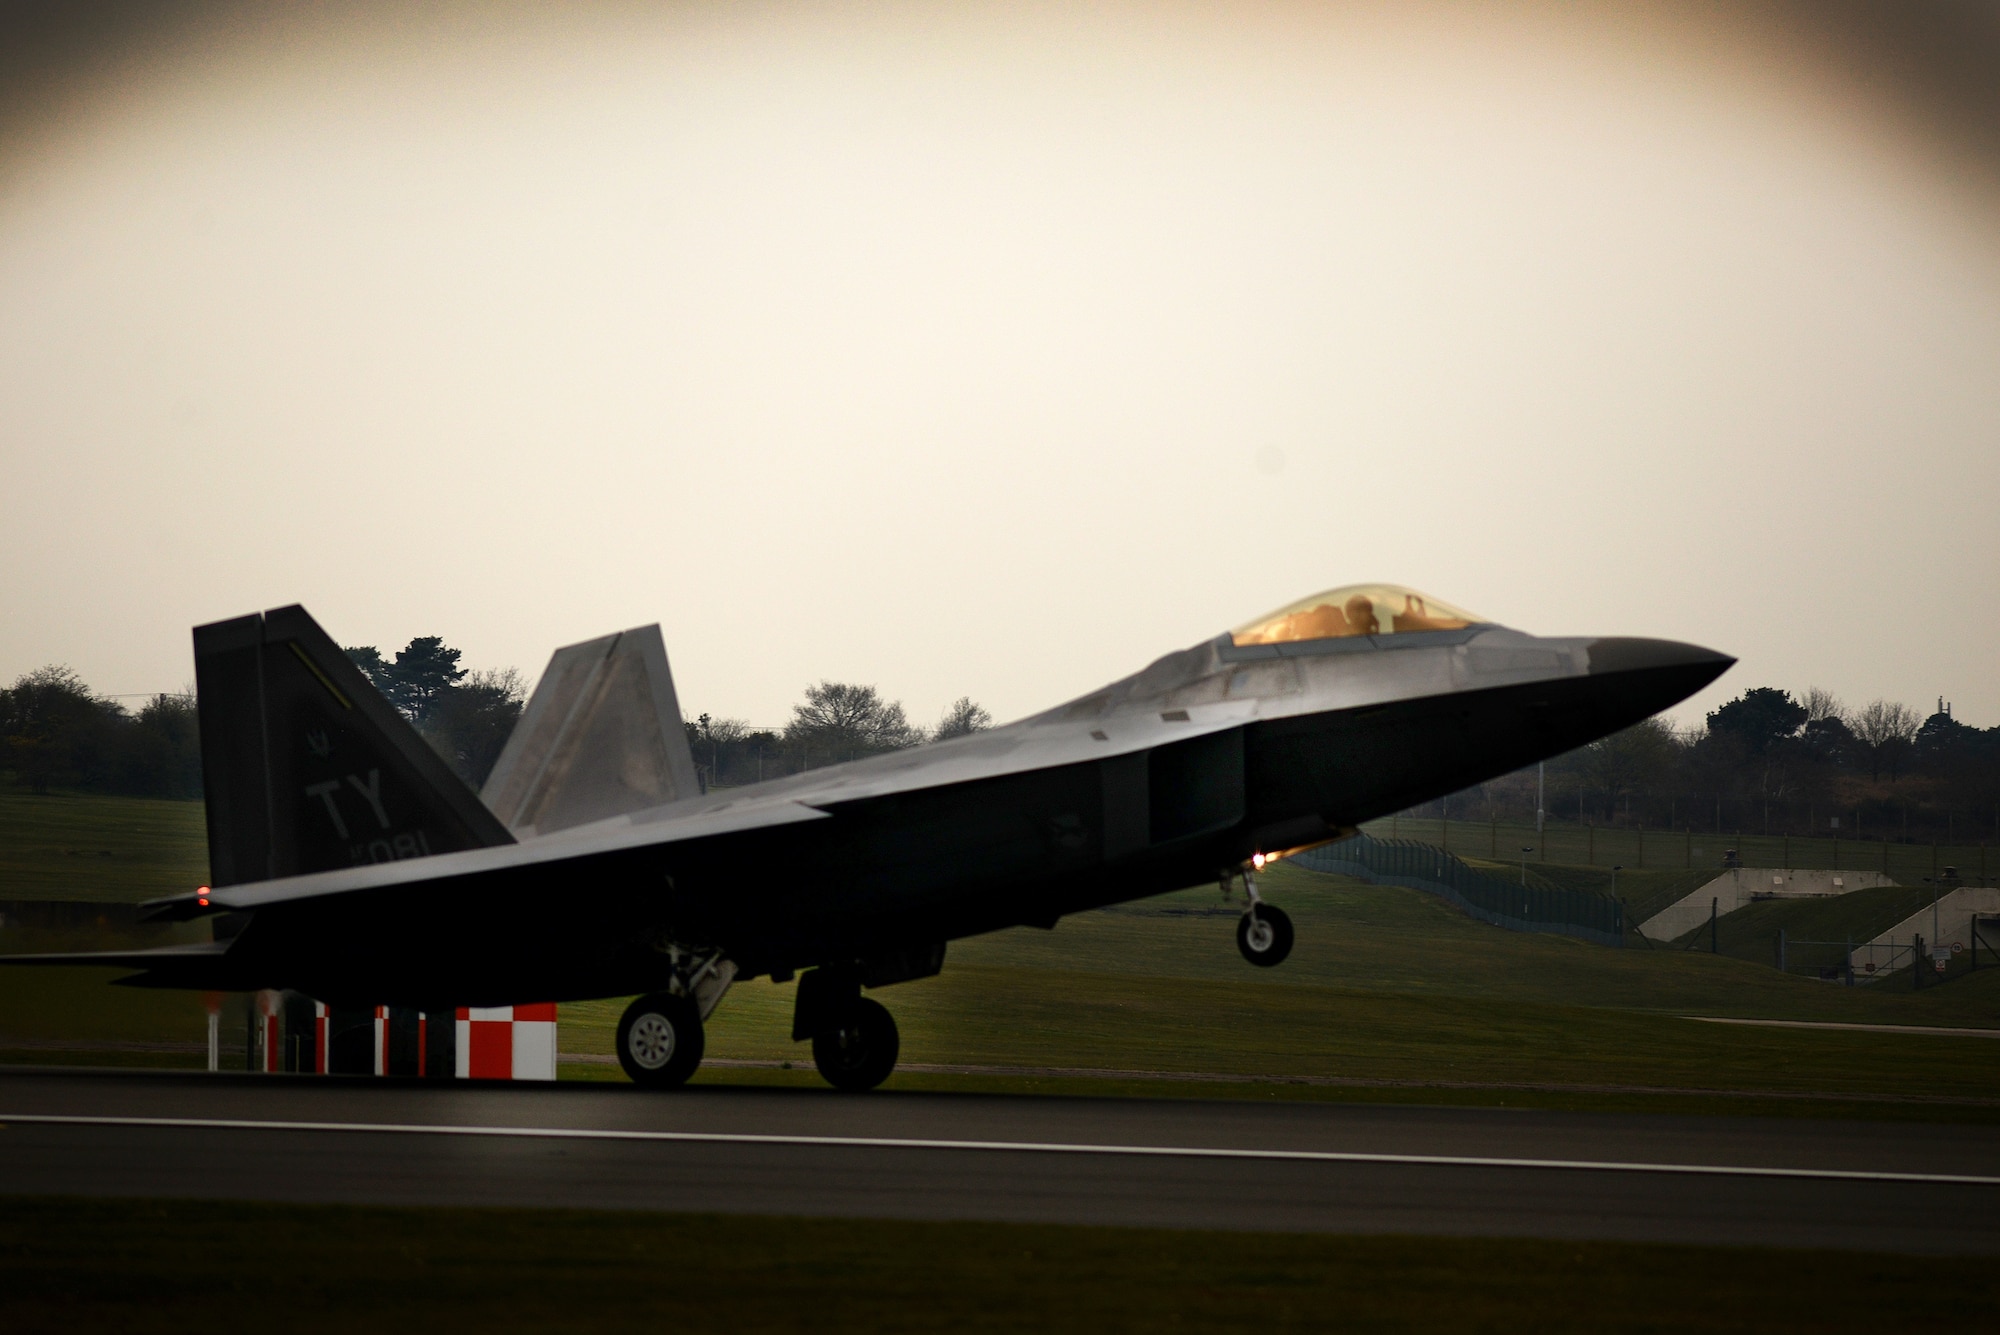 An F-22 Raptor from the 95th Fighter Squadron lands April 11, at Royal Air Force Lakenheath, England. The aircraft arrival marks the second time the U.S. European Command has hosted a deployment of F-22 aircraft in the EUCOM Area of Responsibility.  (U.S. Air Force photo/ Tech. Sgt. Matthew Plew)
